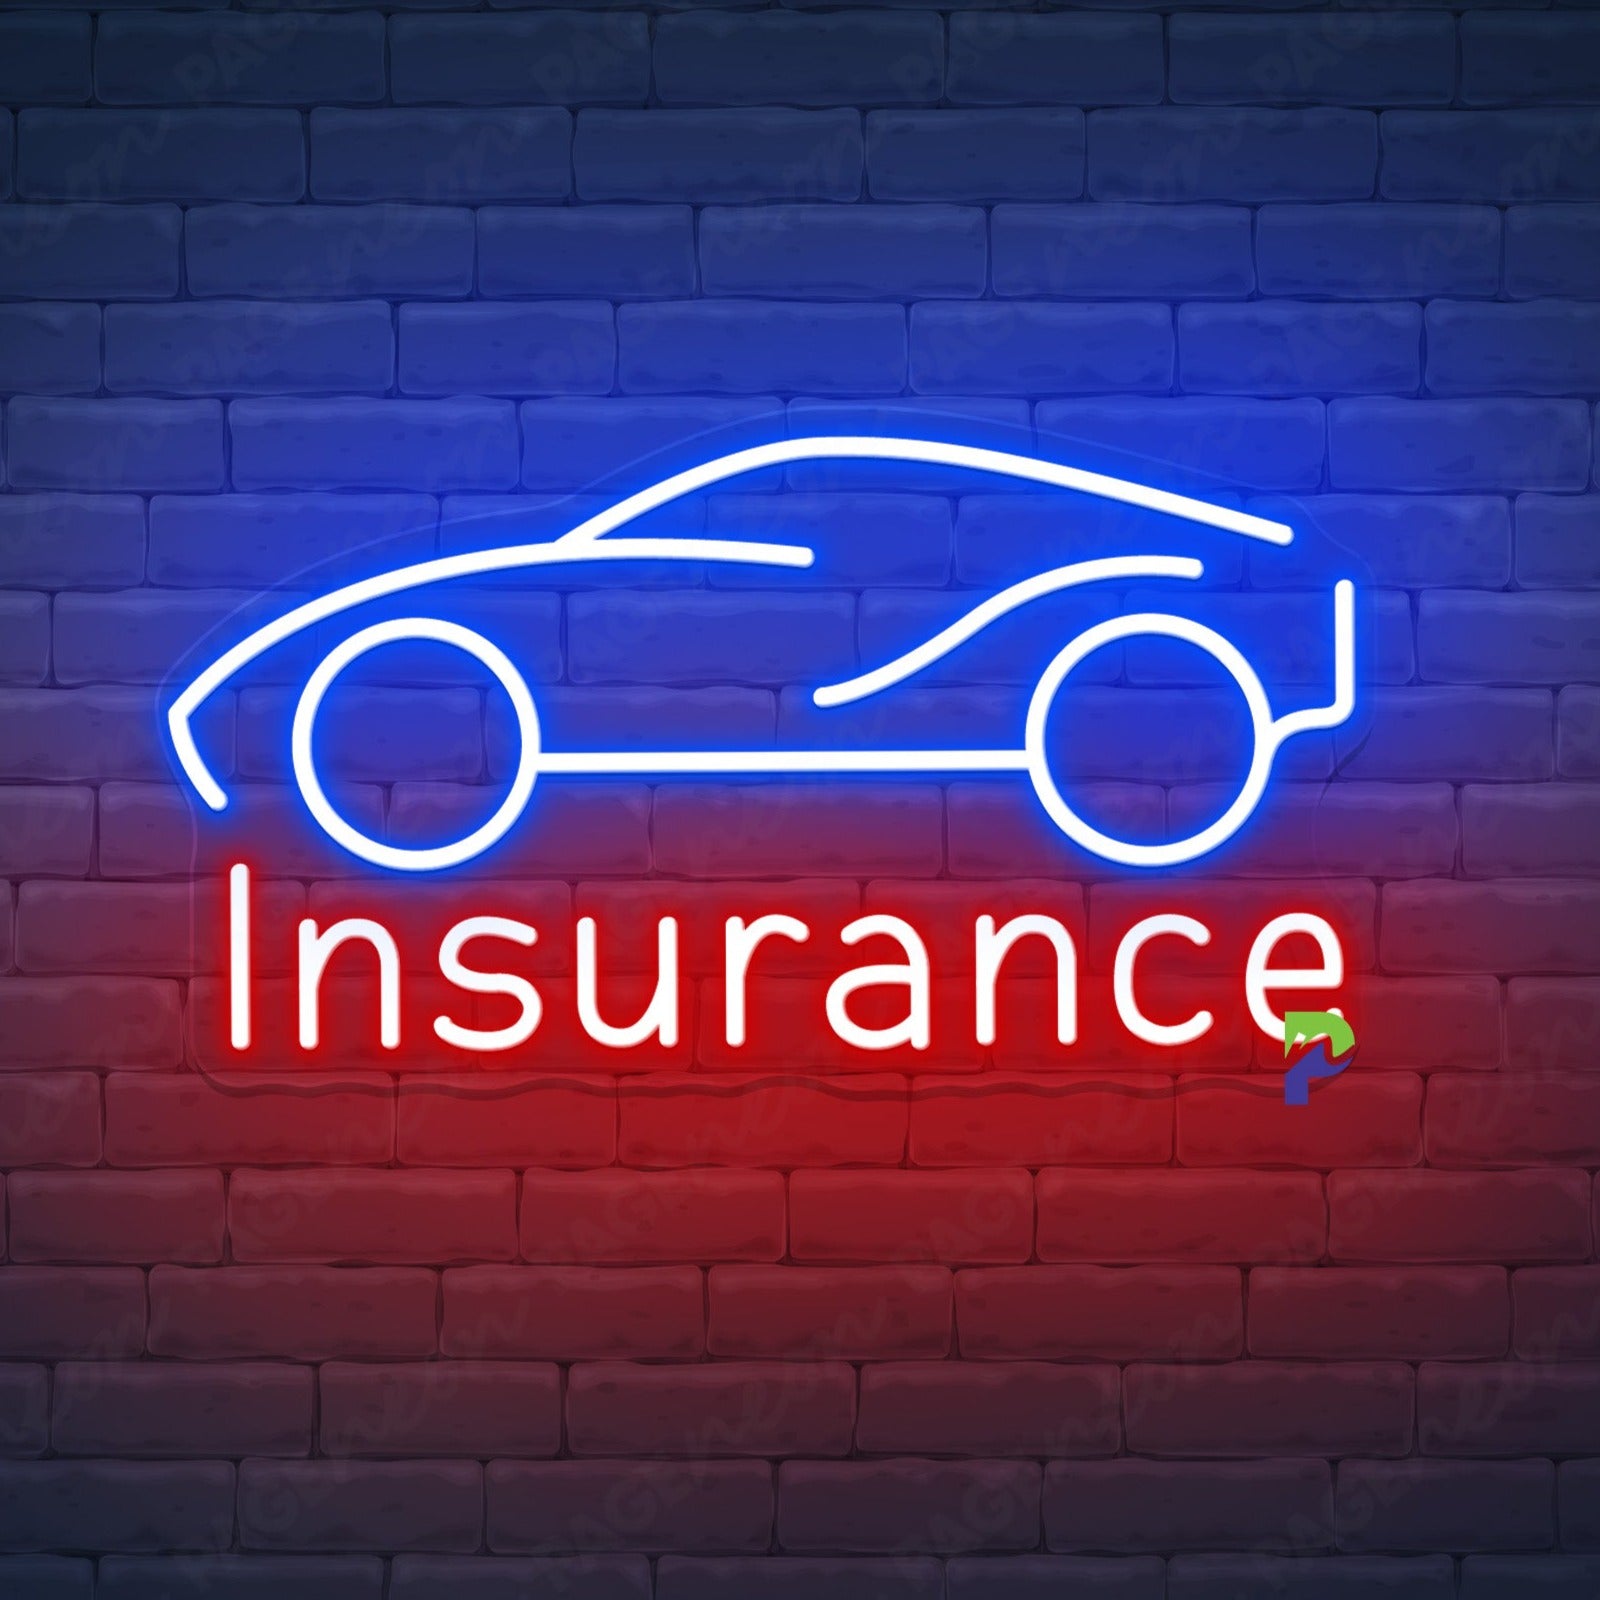 Car Insurance Neon Signs Business Led Light